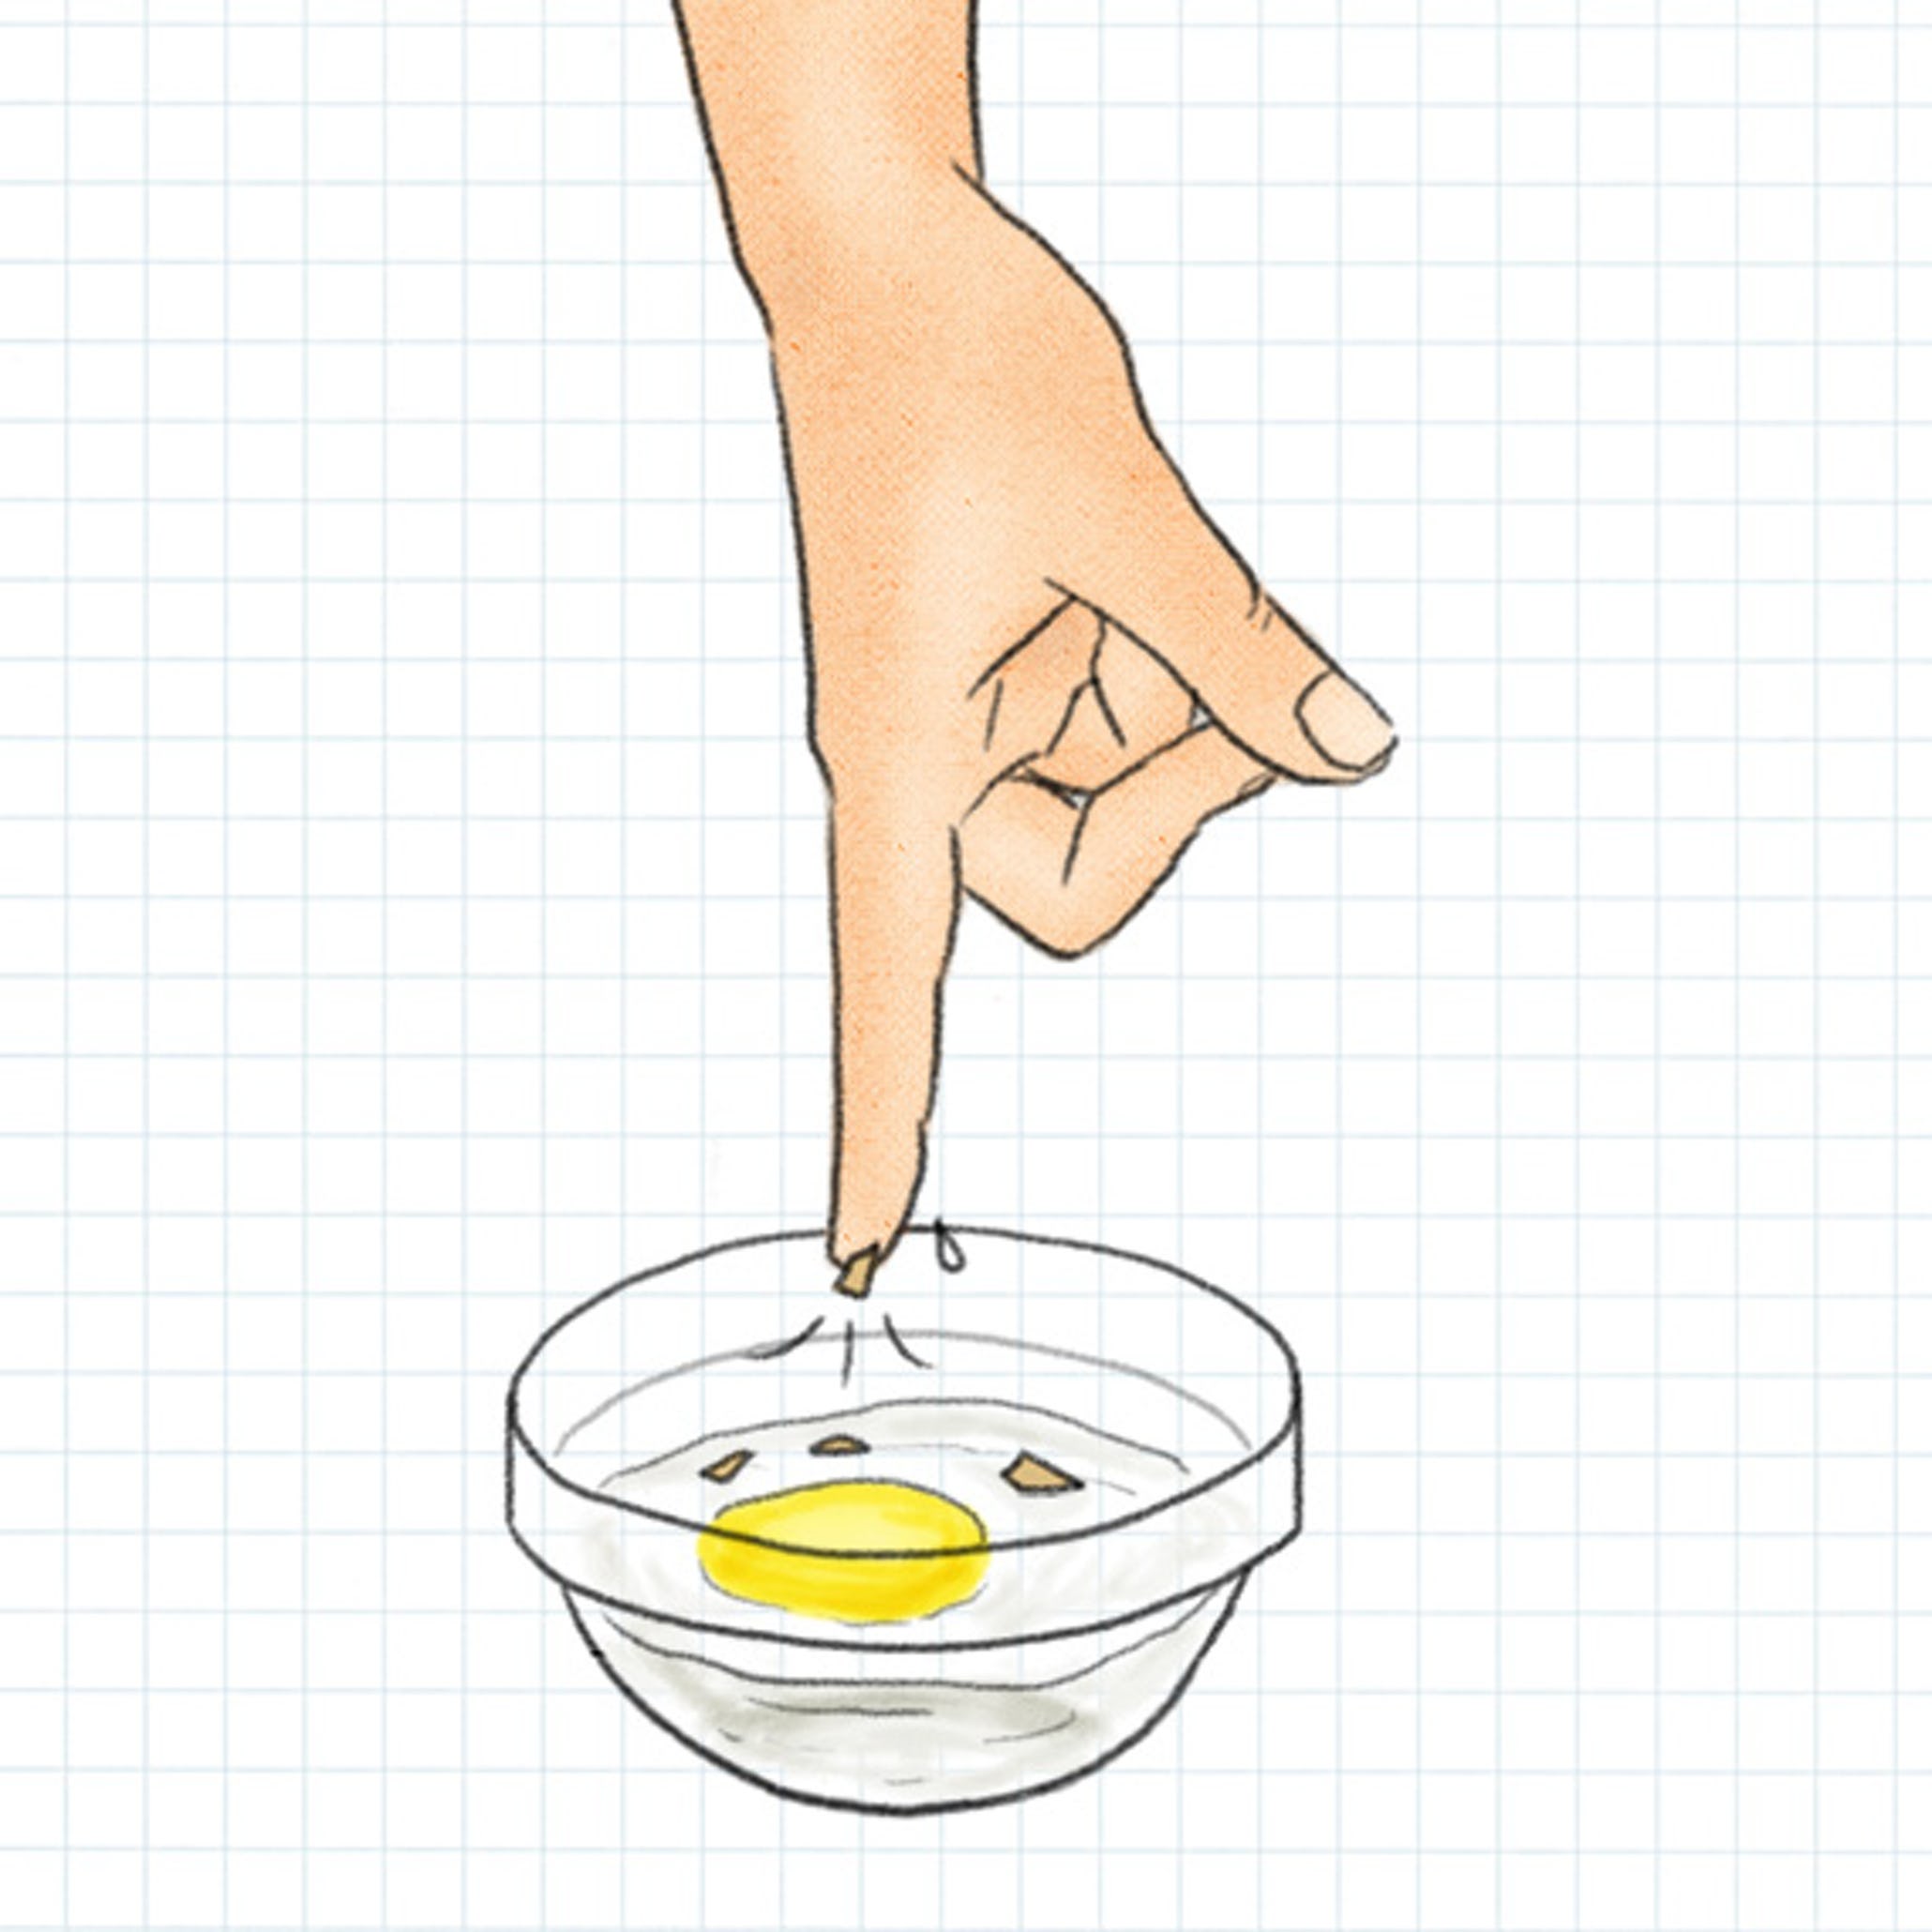 Hack #14: Easily remove eggshell pieces from yolk